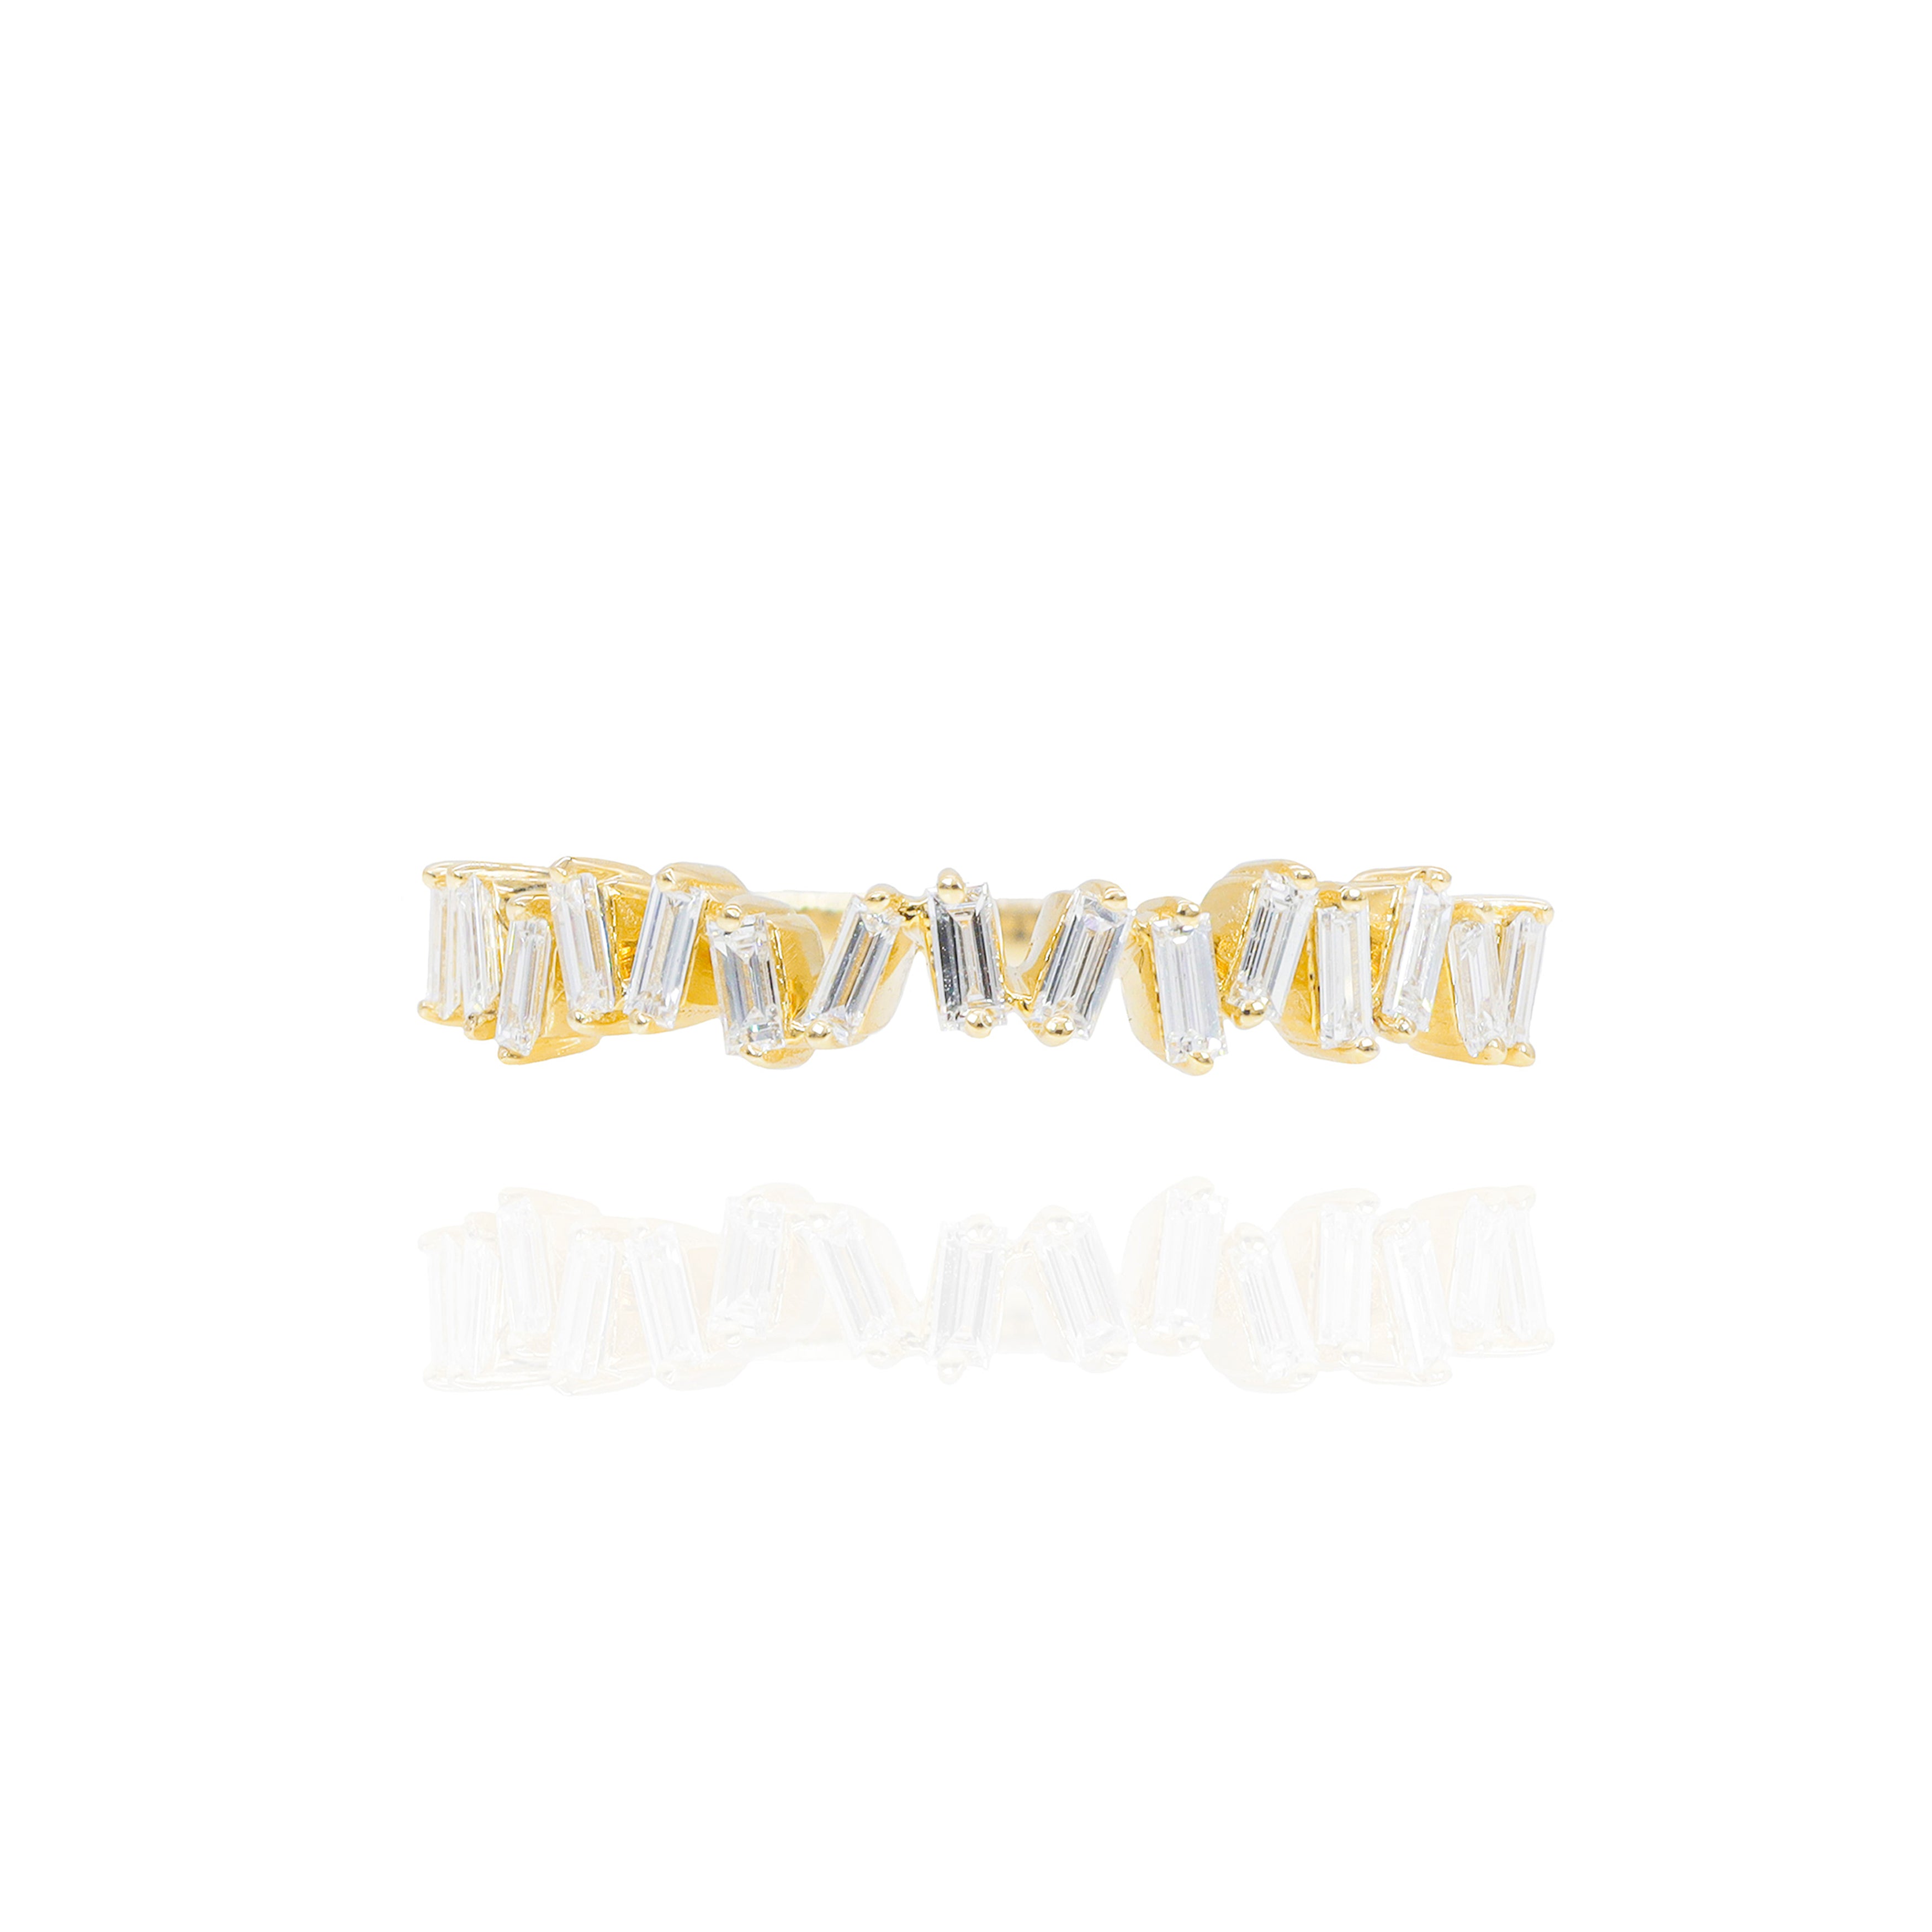 Jagged Baguette Diamond Ring Band